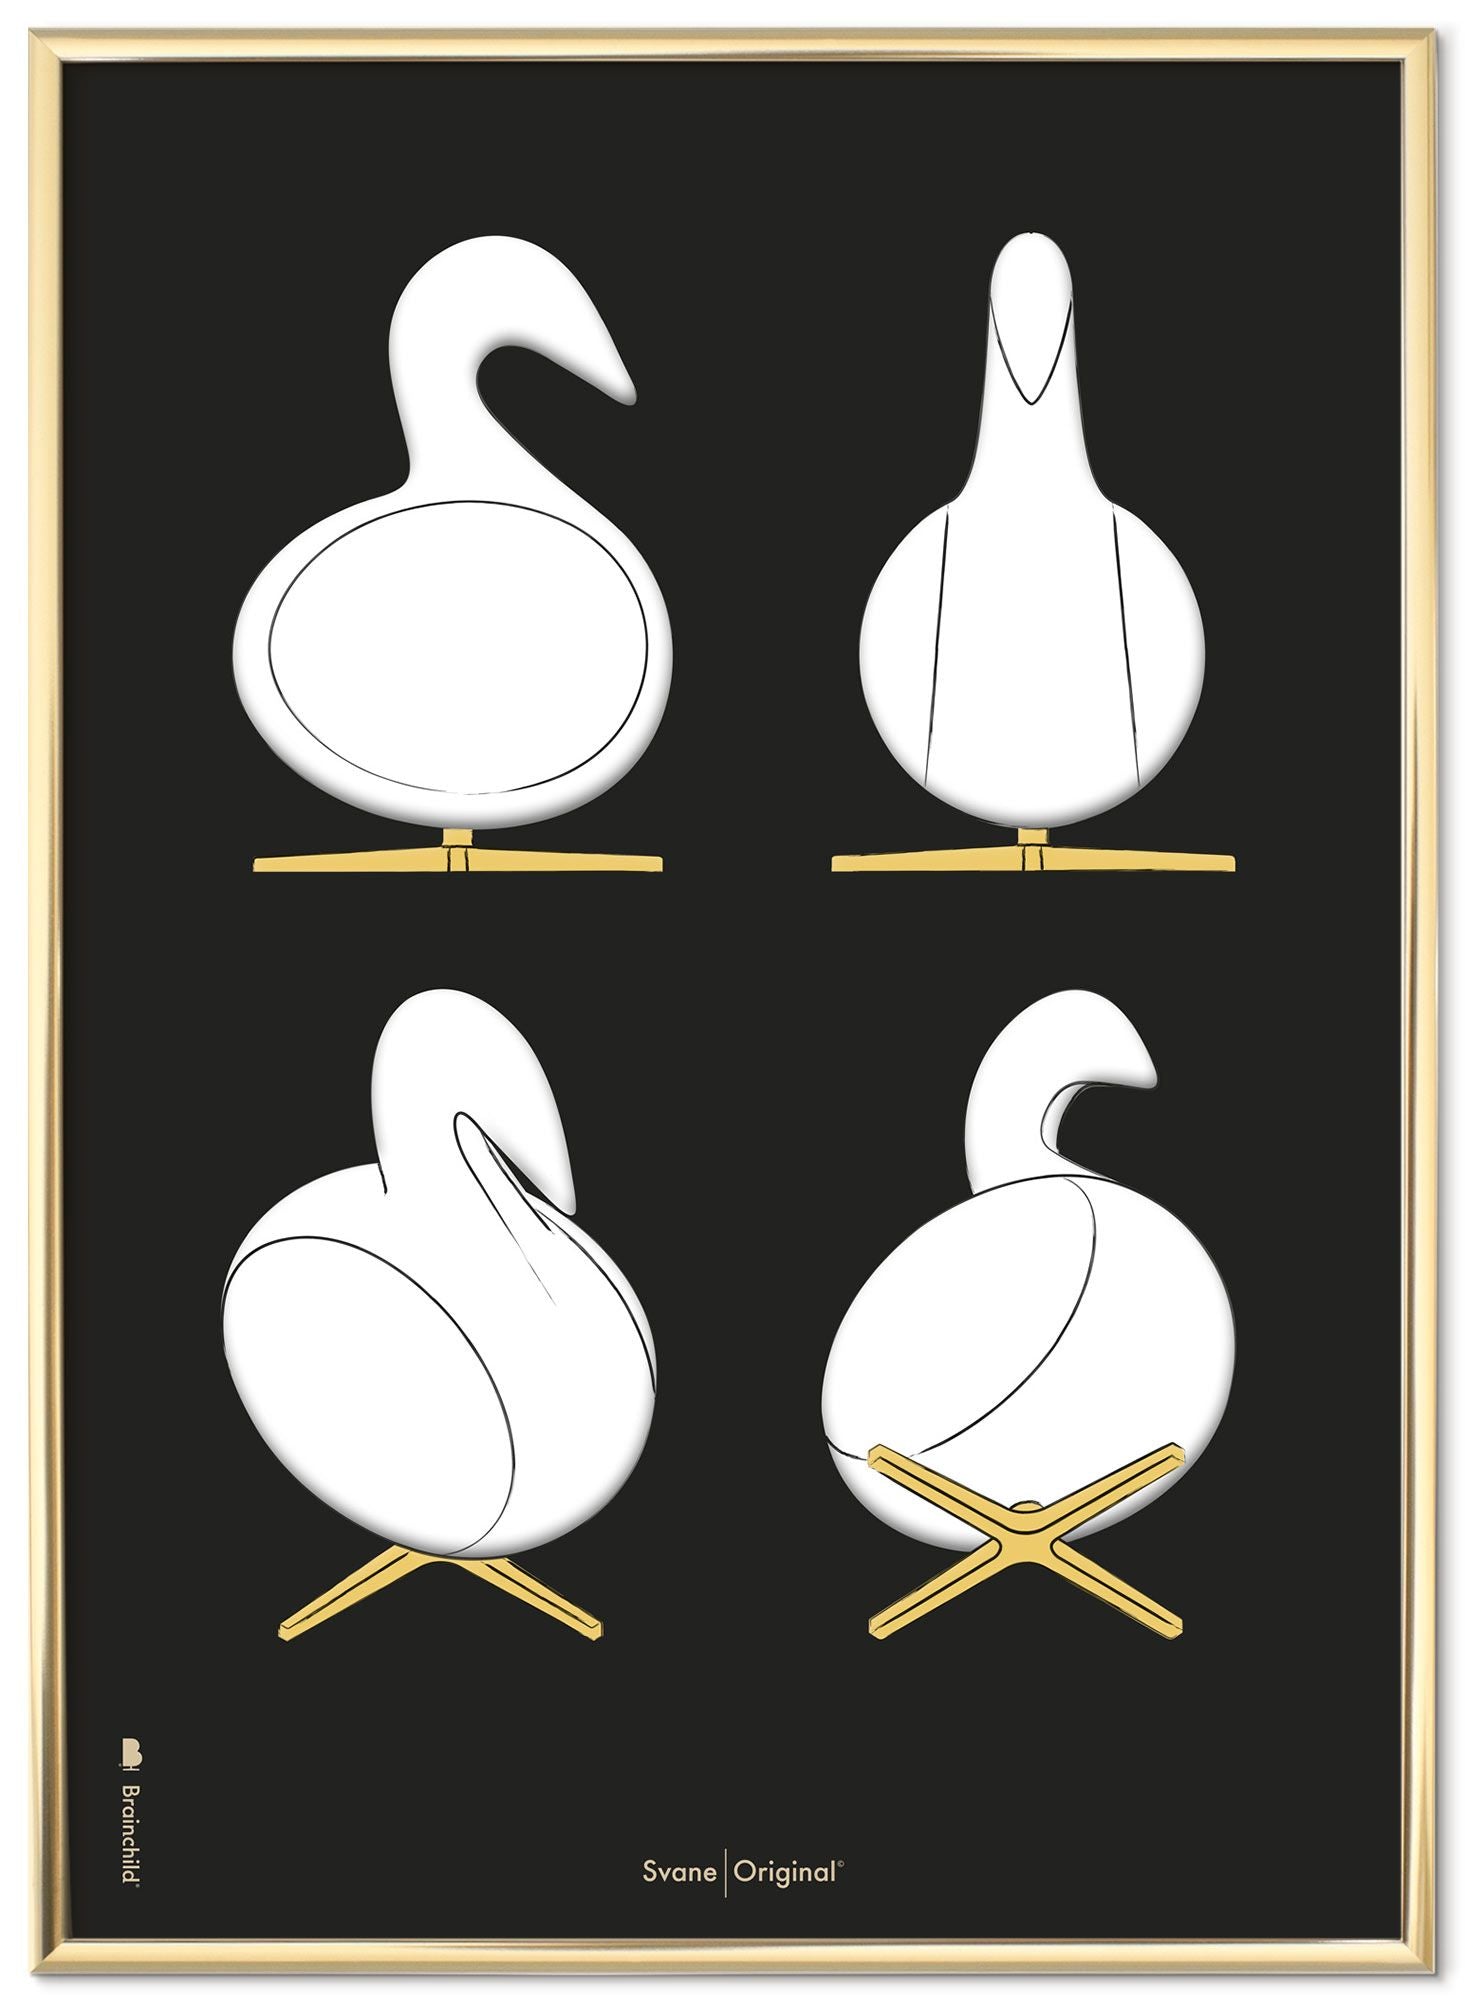 Brainchild Swan Design Sketches Poster Frame Made Of Brass Colored Metal 70x100 Cm, Black Background